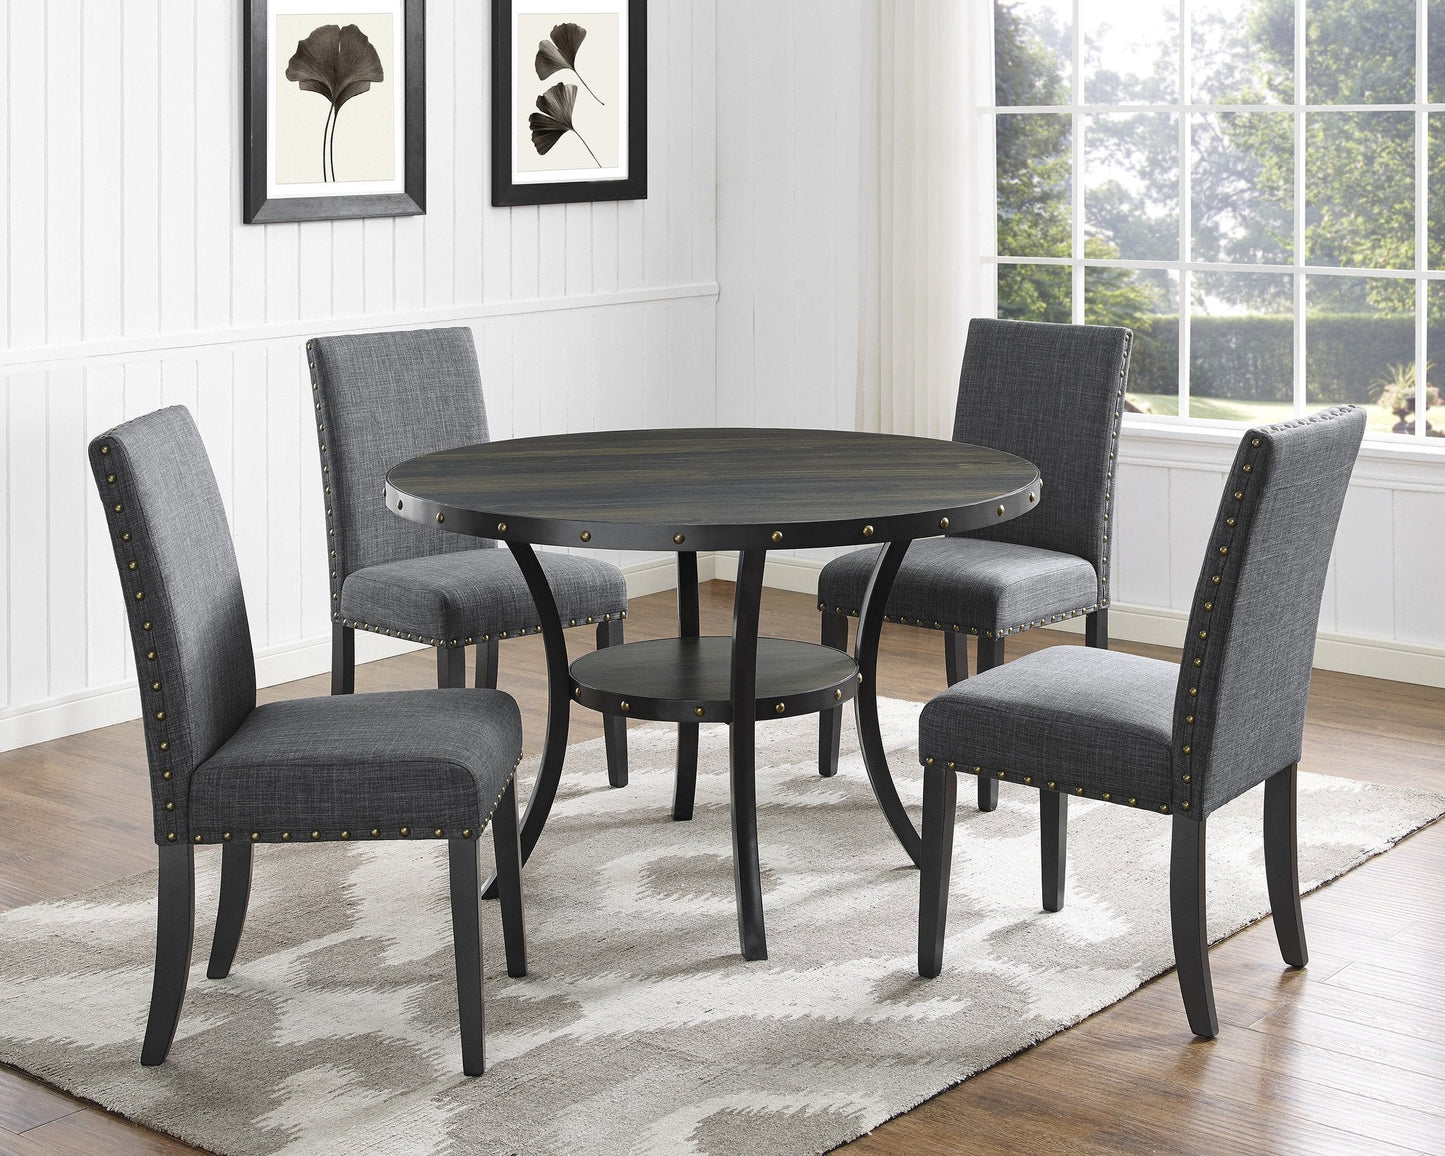 Biony Gray Fabric Dining Chairs with Nailhead Trim, Set of 2